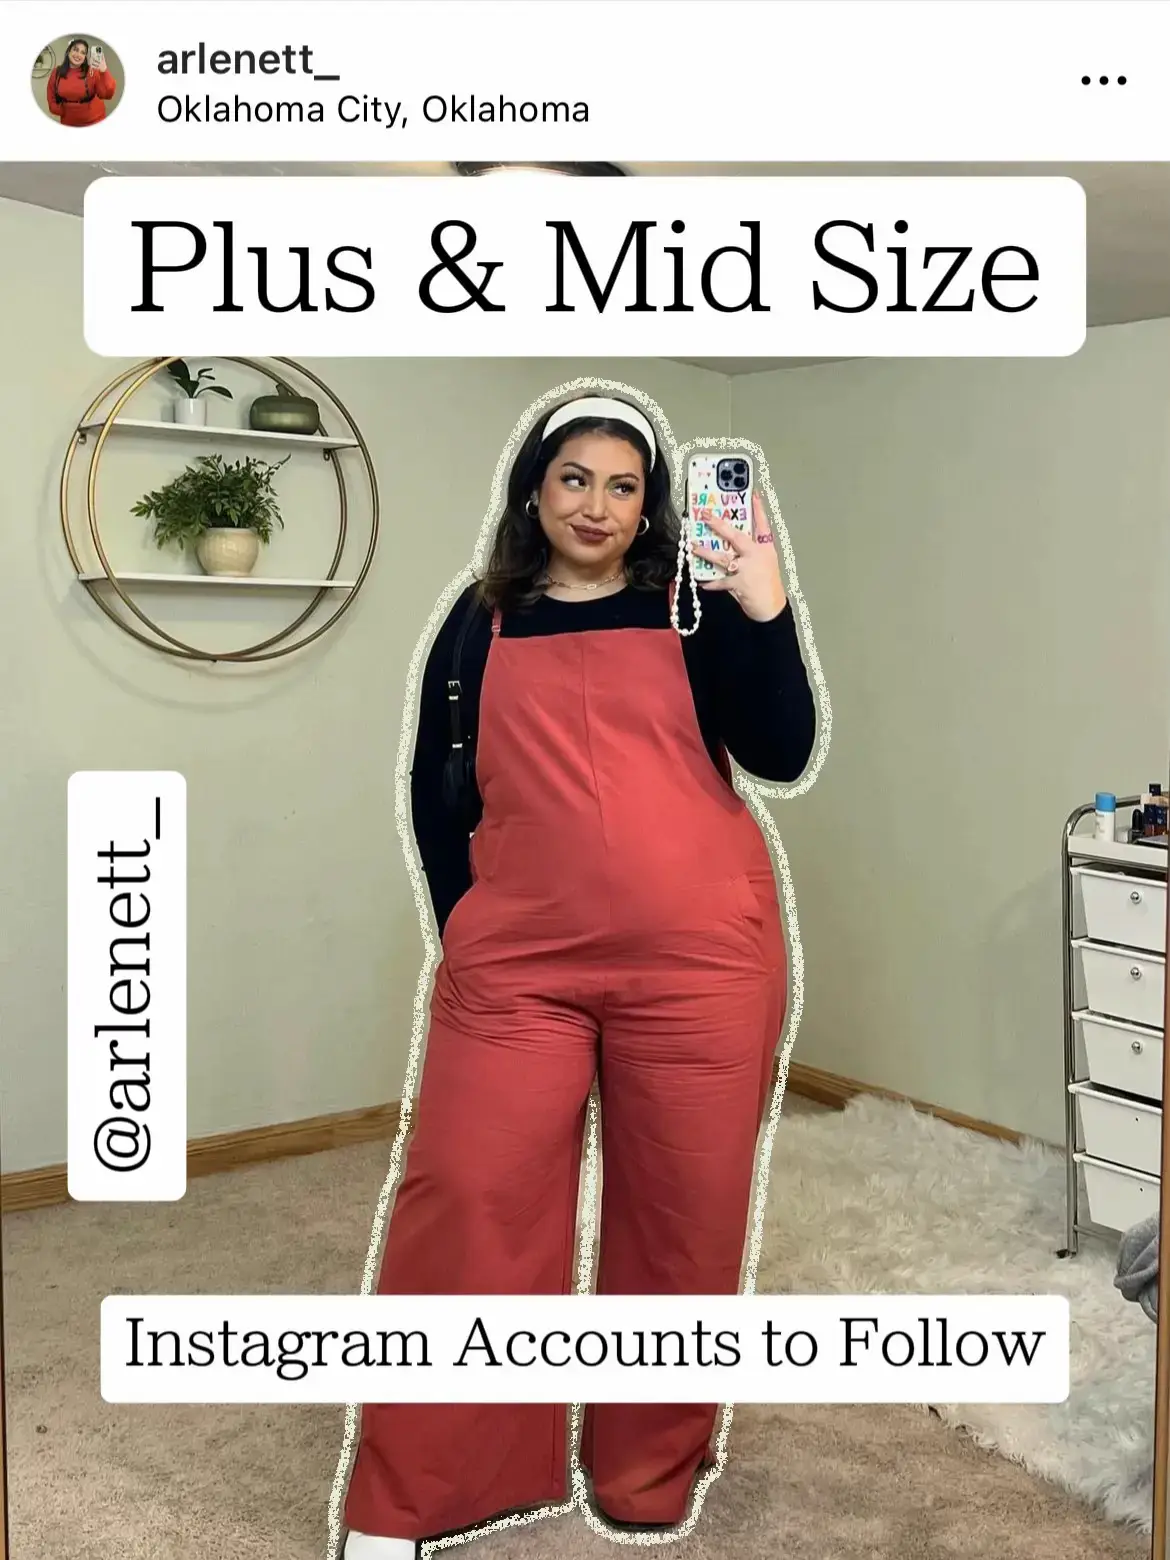 8 In-Betweener Influencers to Follow For Mid-Size Fashion Inspiration